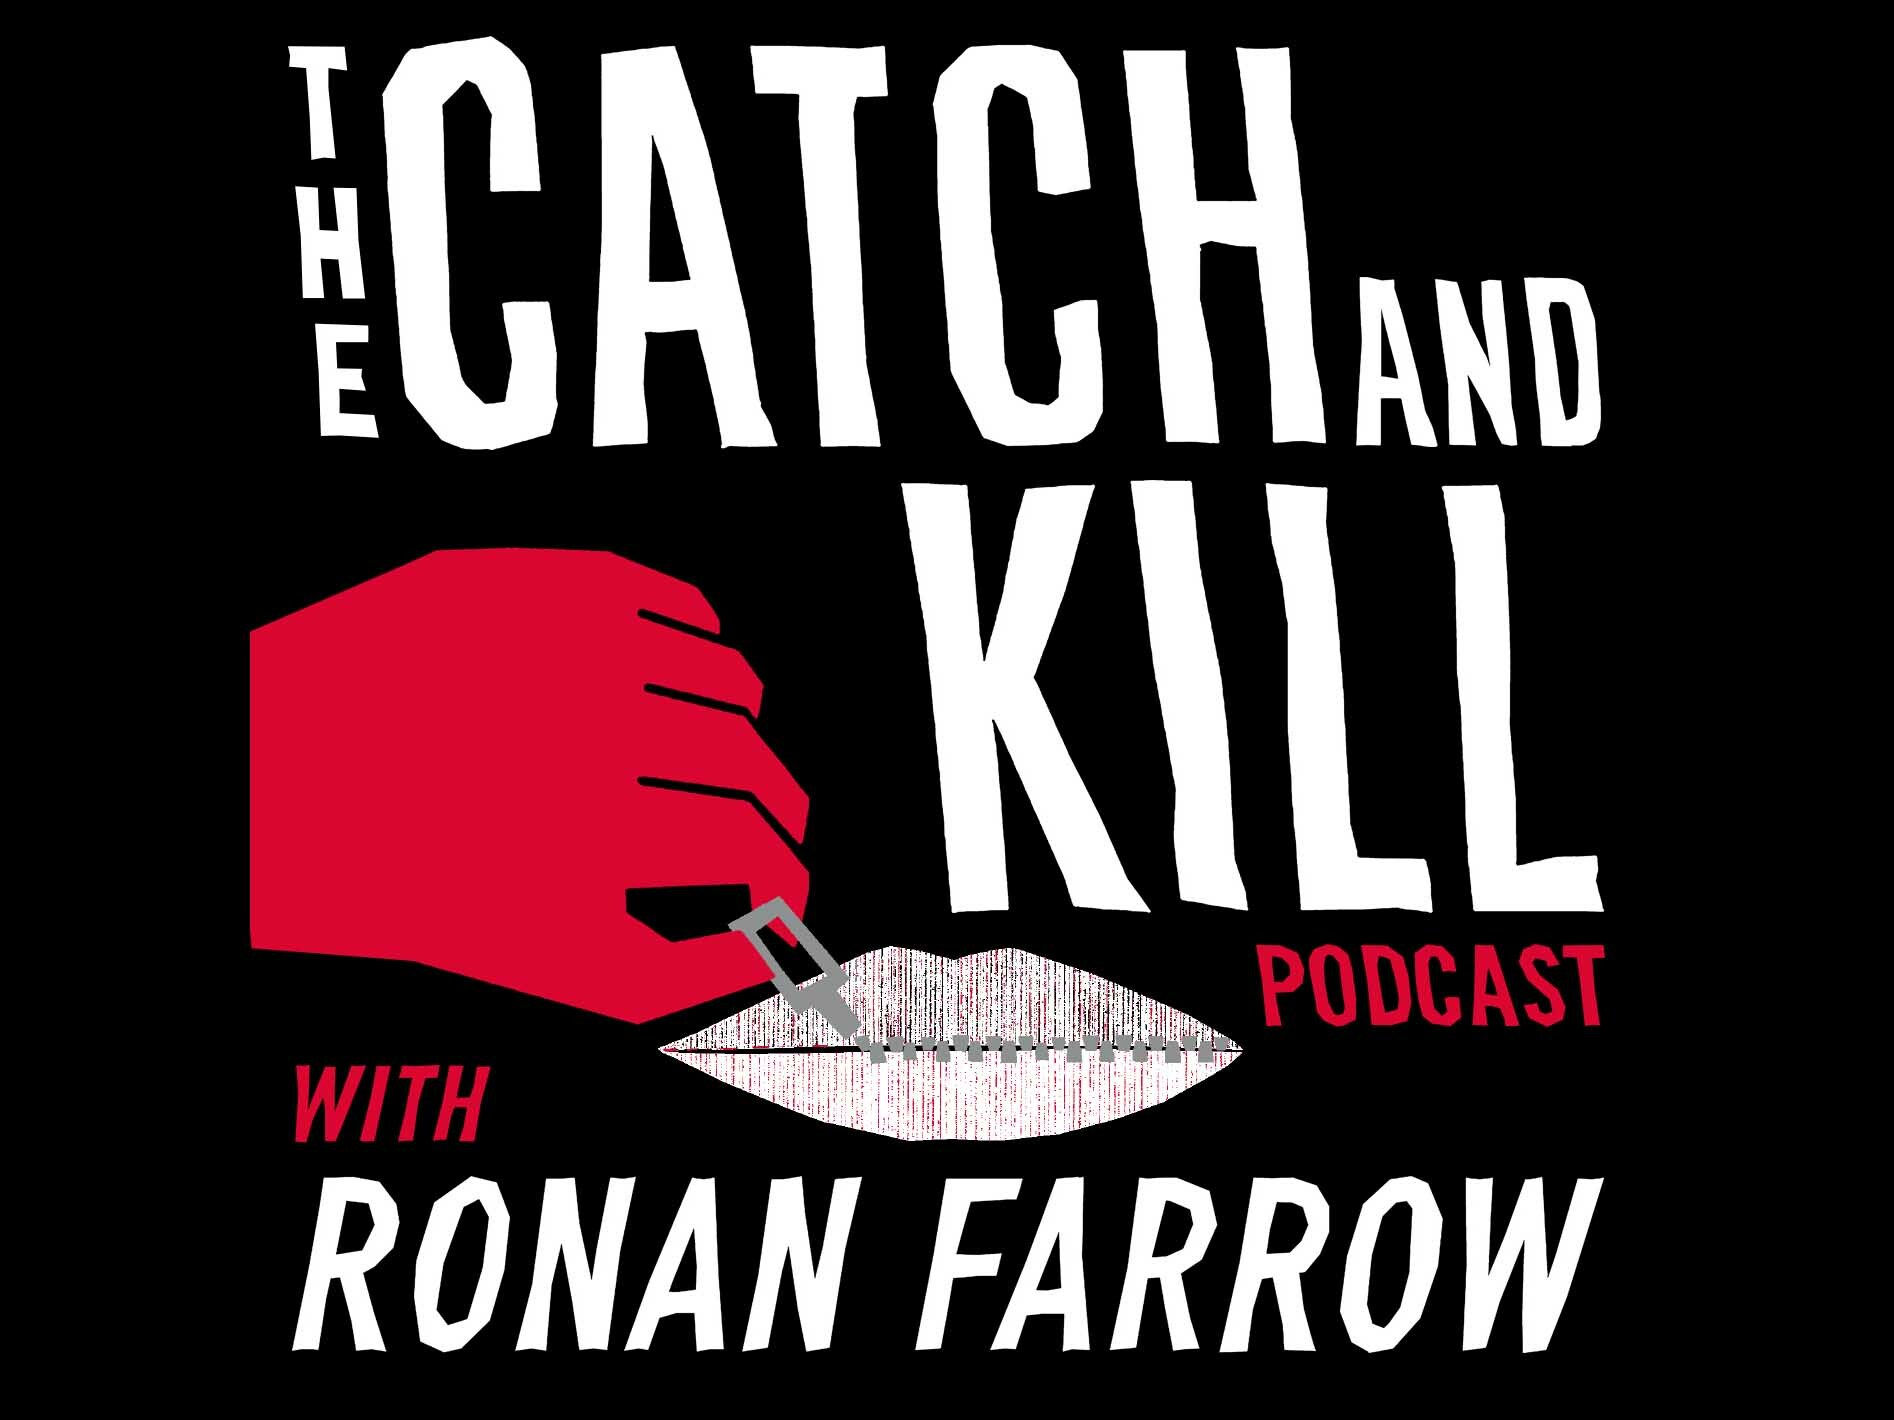 The Catch and Kill Podcast